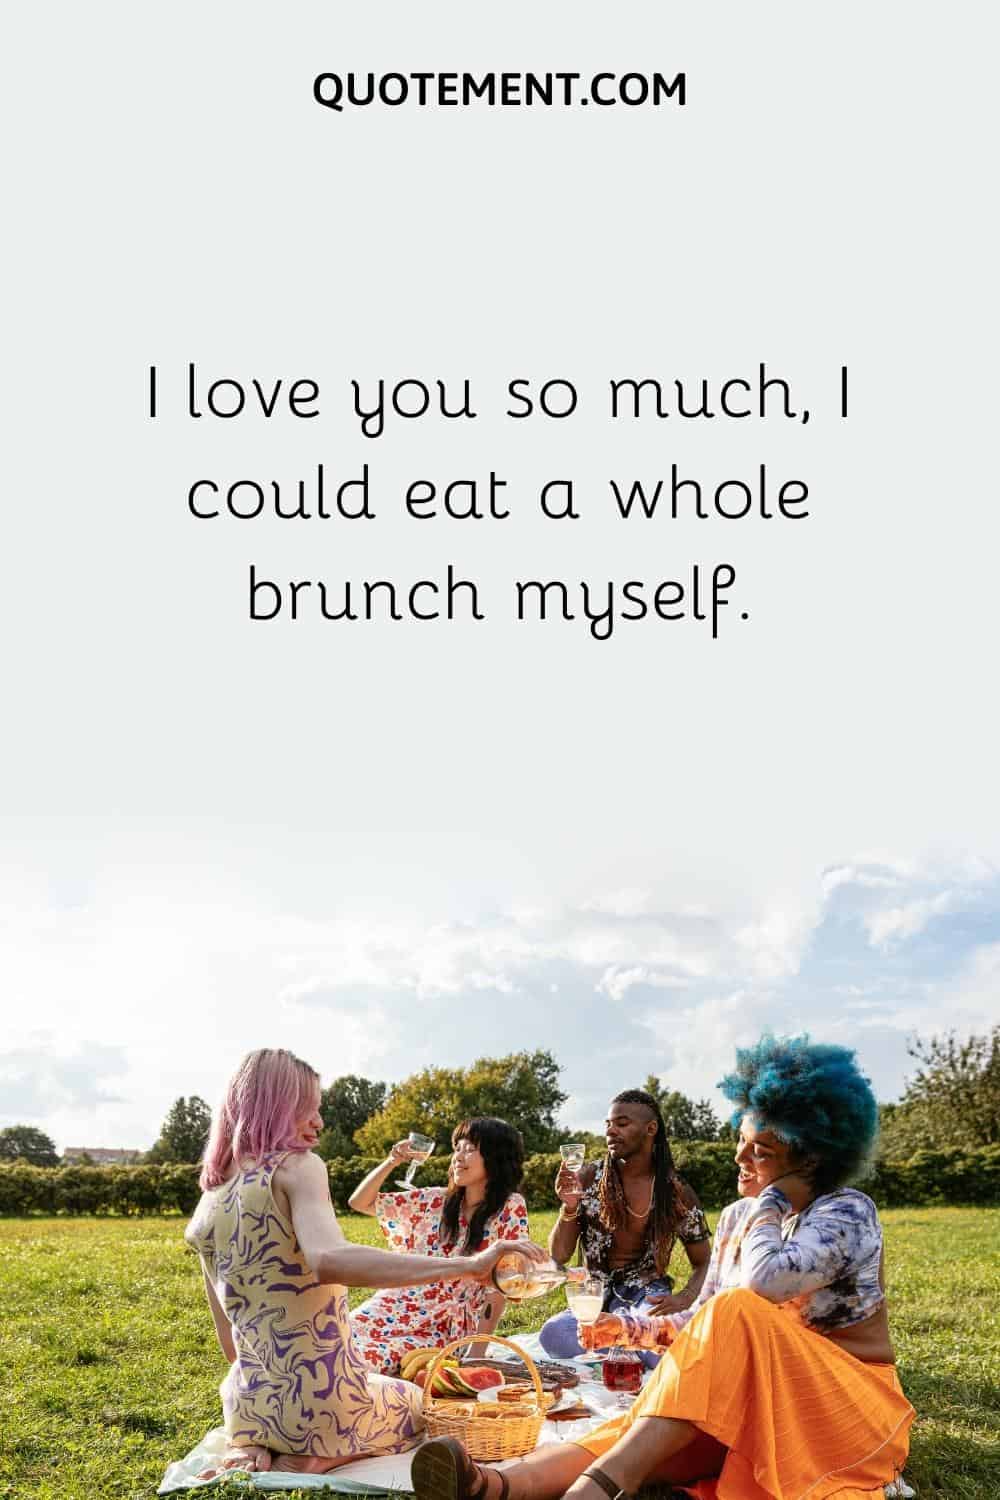 I love you so much, I could eat a whole brunch myself.